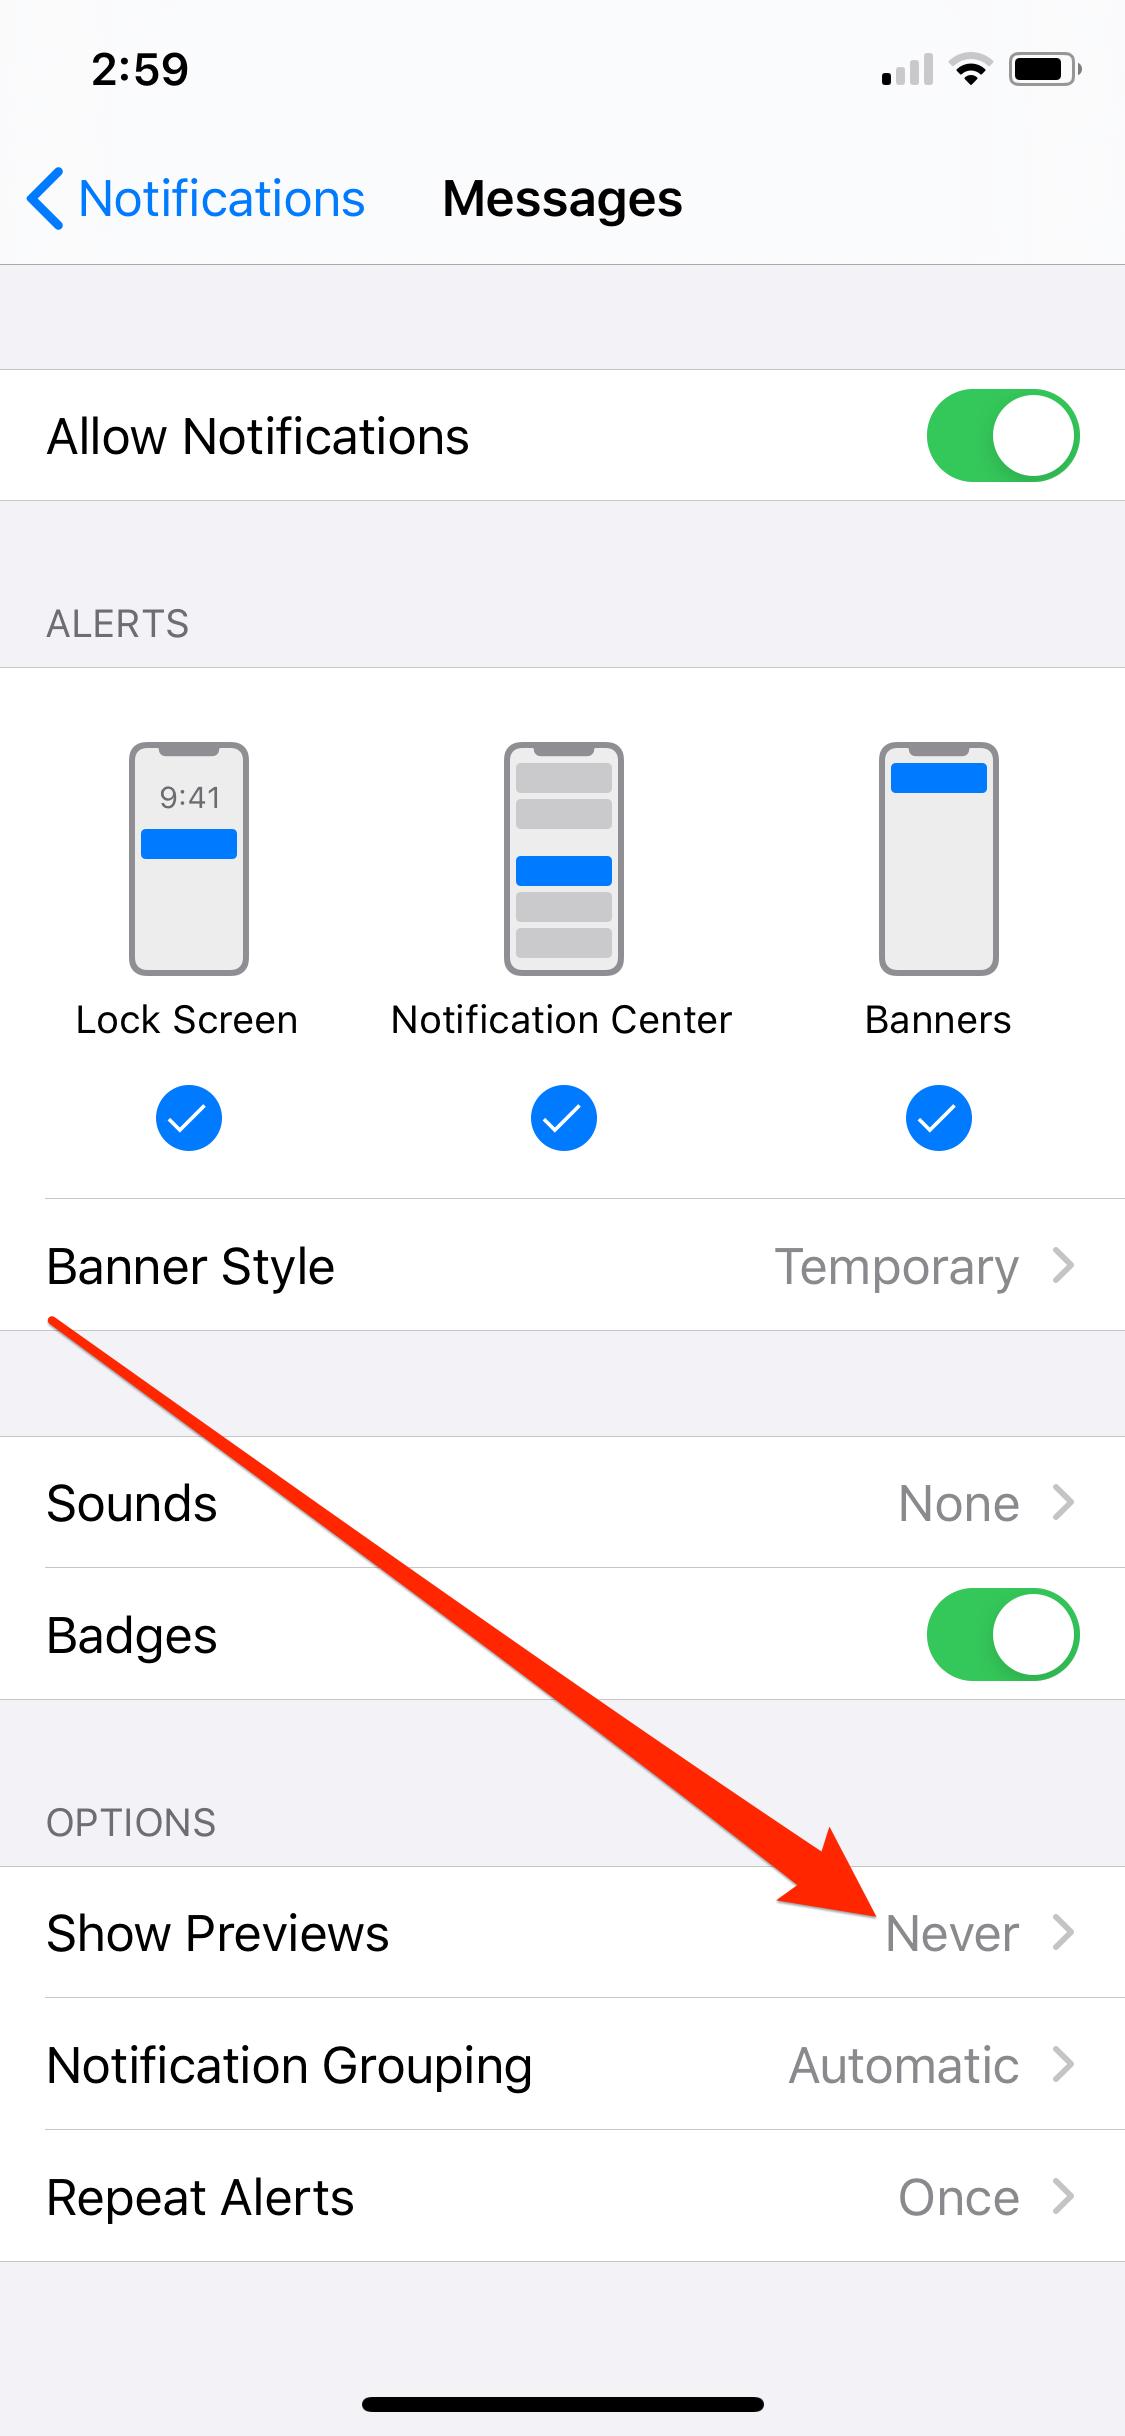 How To: Get the iPhone's Auto-Hiding Lock Screen Notifications on Android